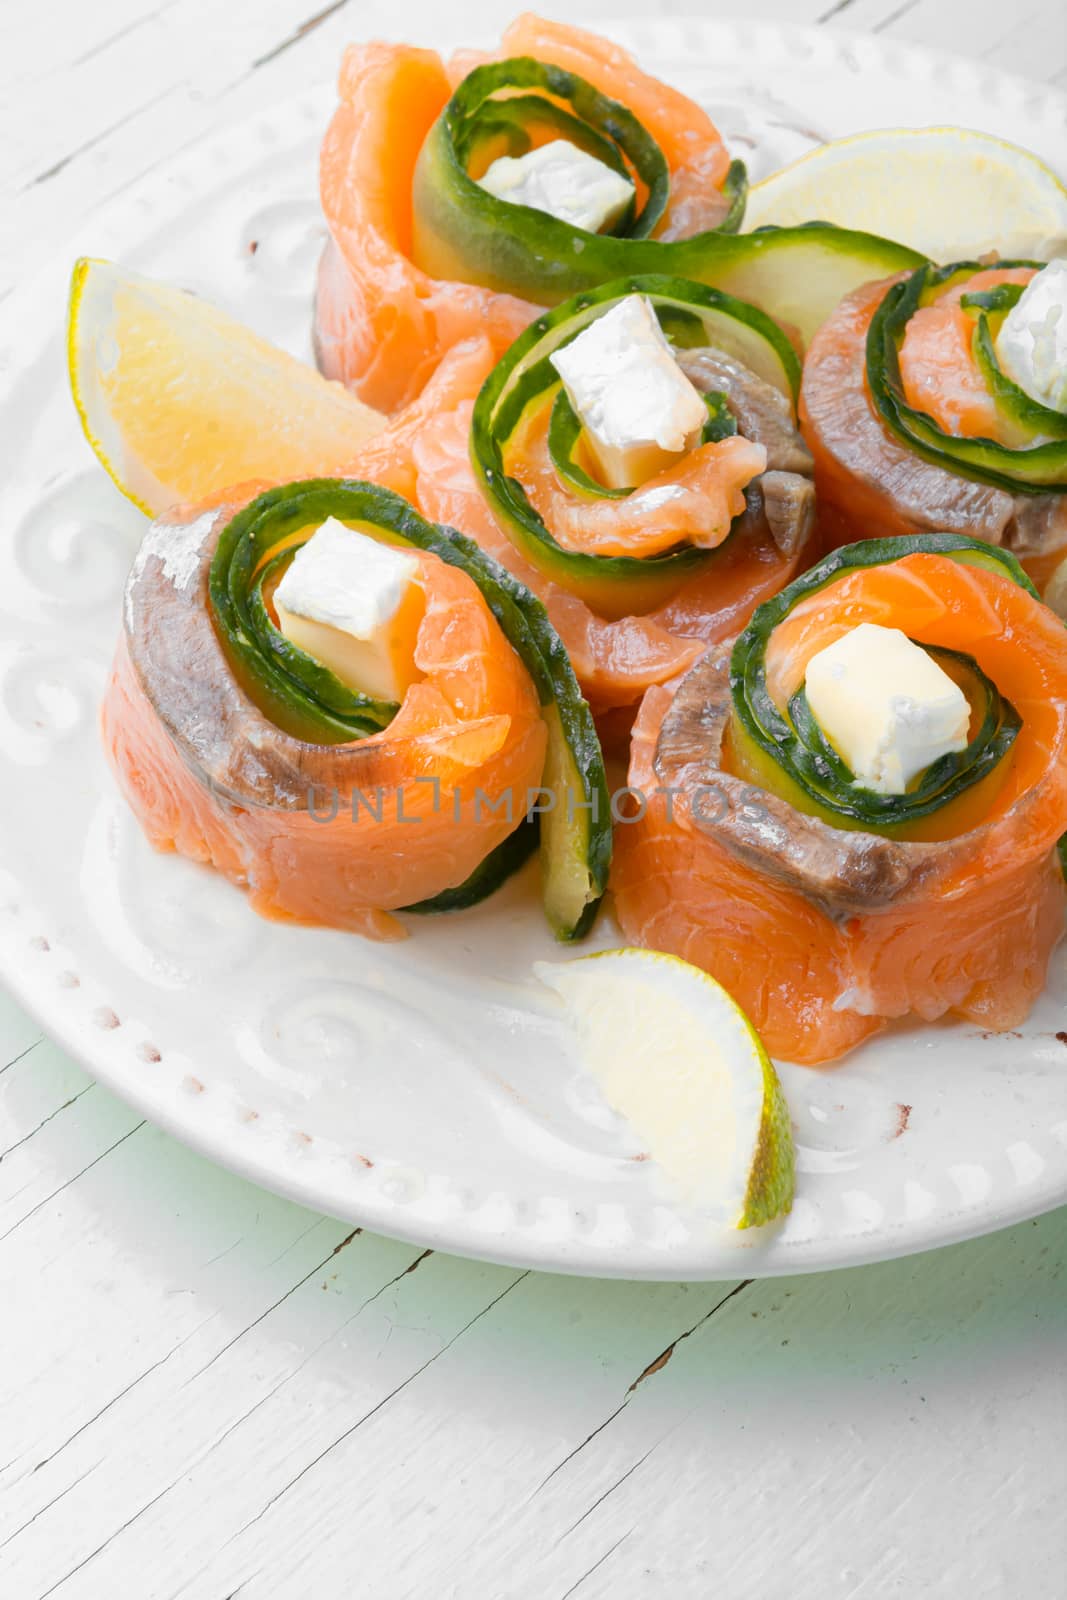 Salmon roll with cheese,cucumber and lime on plate.Rolls of red fish fillet